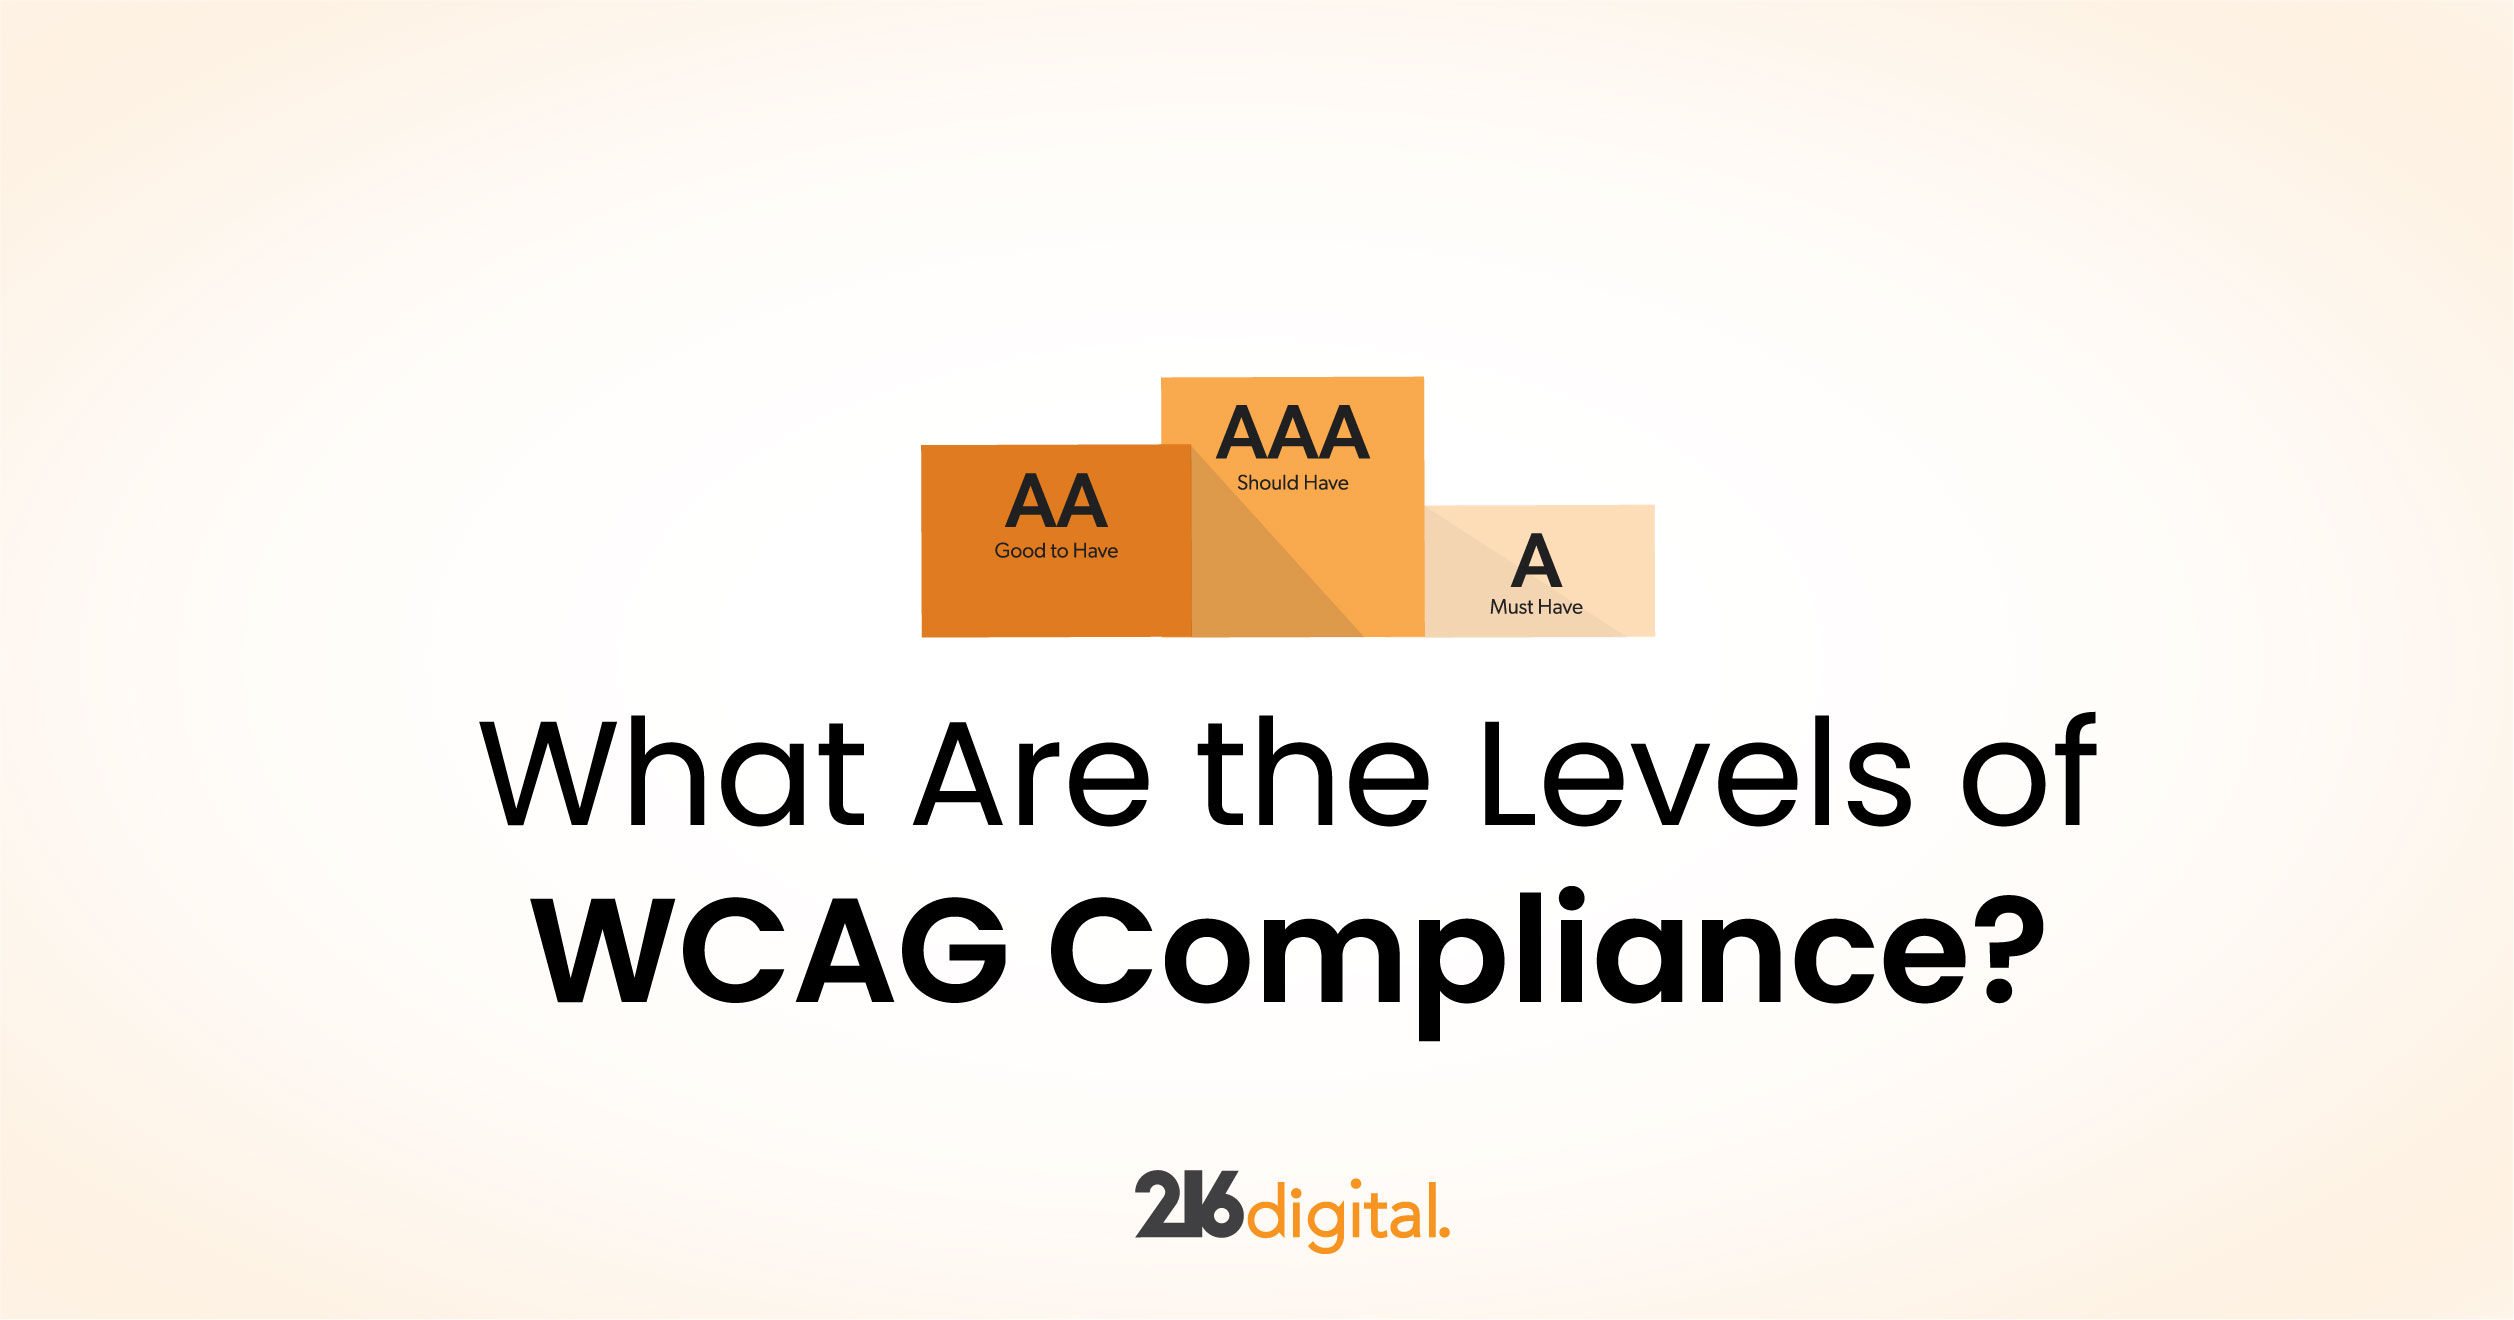 What Are the Levels of WCAG Compliance?